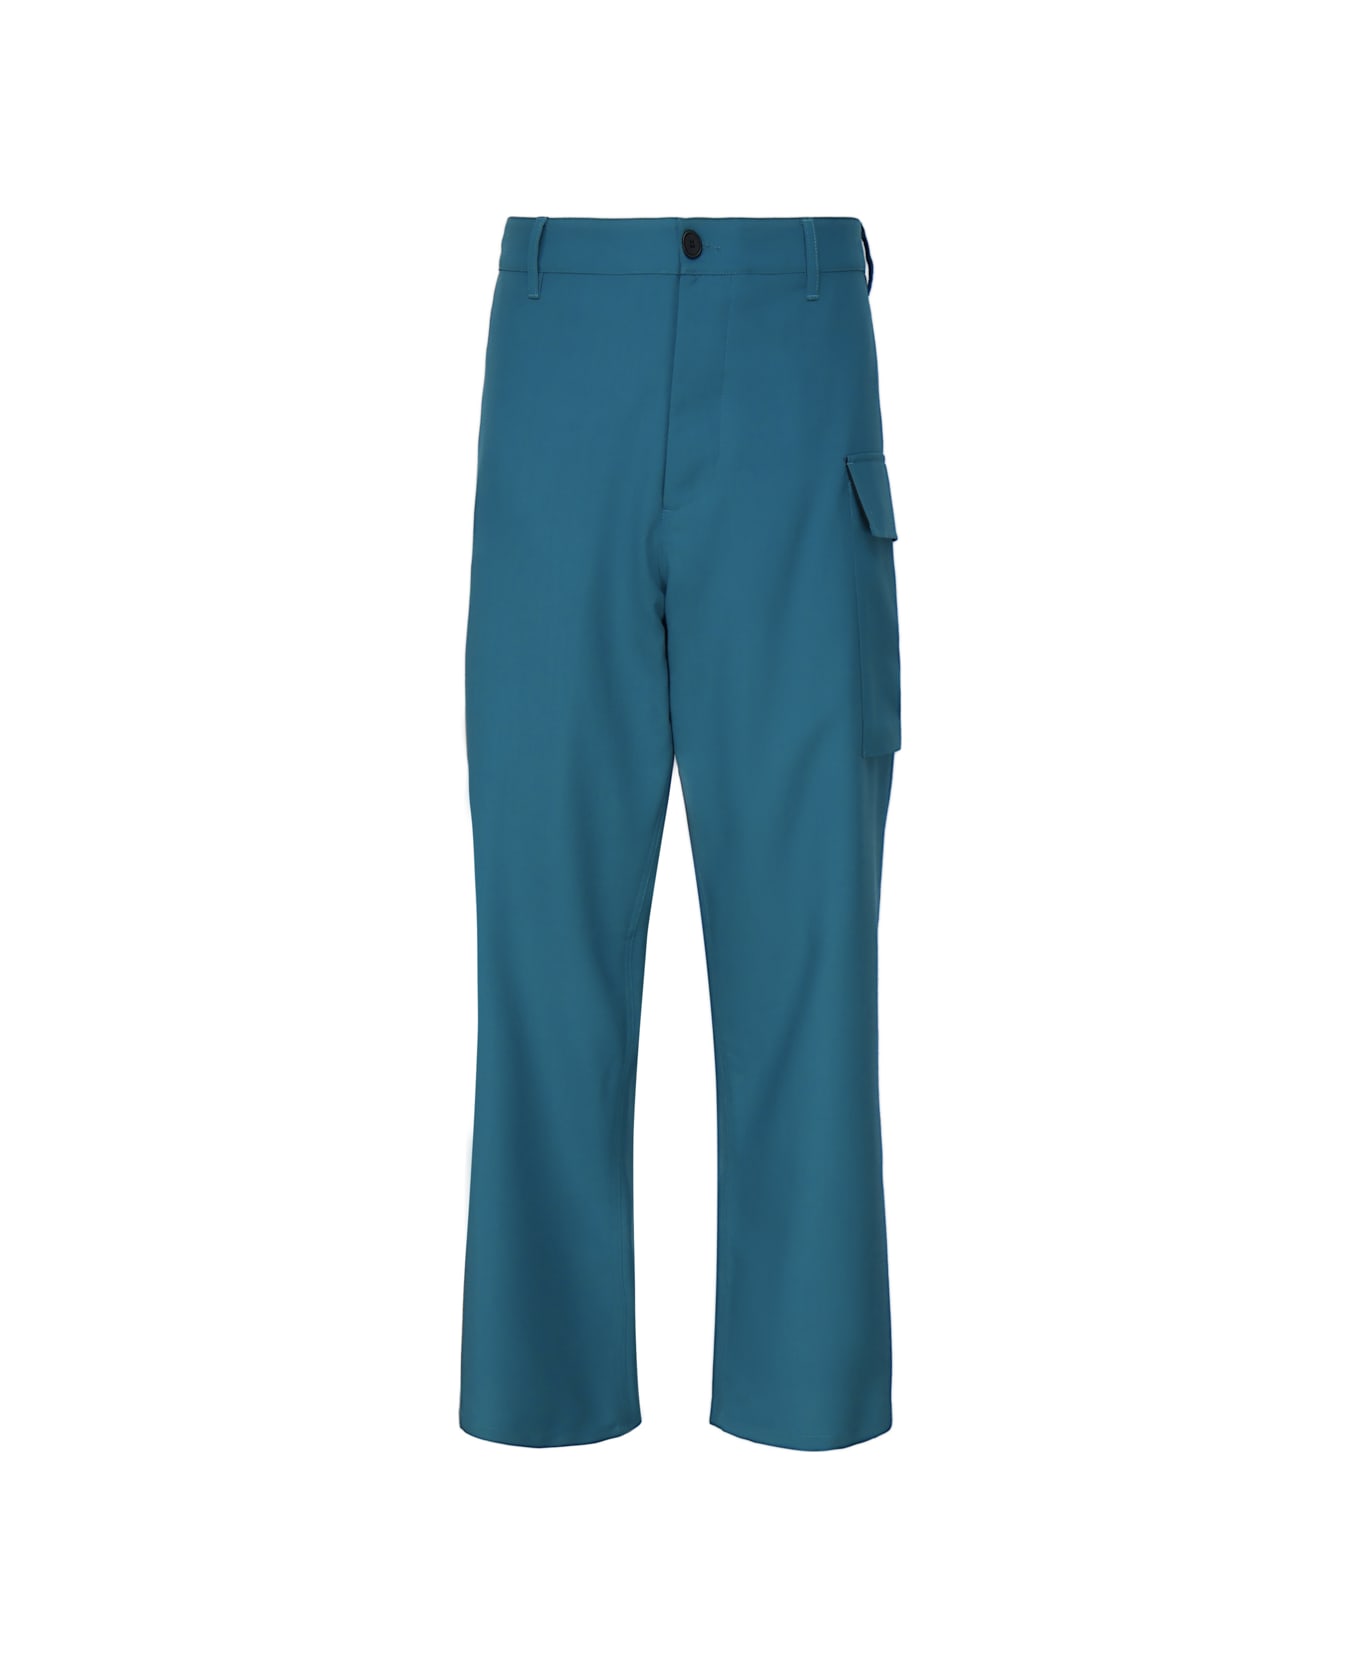 Marni Cool Wool Trousers With Cargo Pockets - Petrol blue